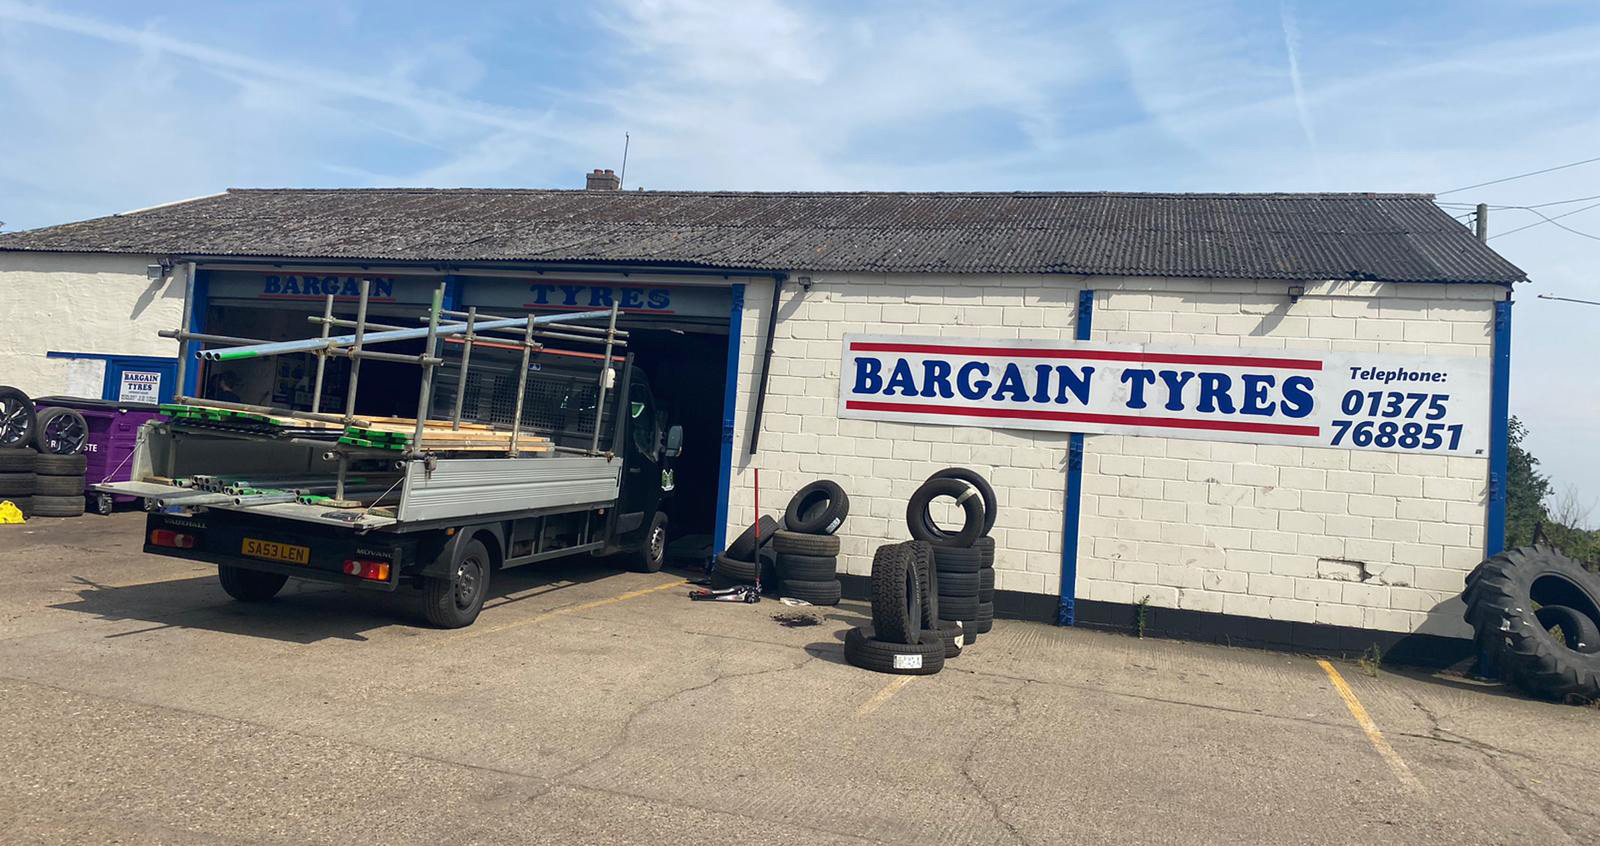 Bargain Tyres | Mobile tyre fitting | Tyres | Locking Wheel Nut Removal